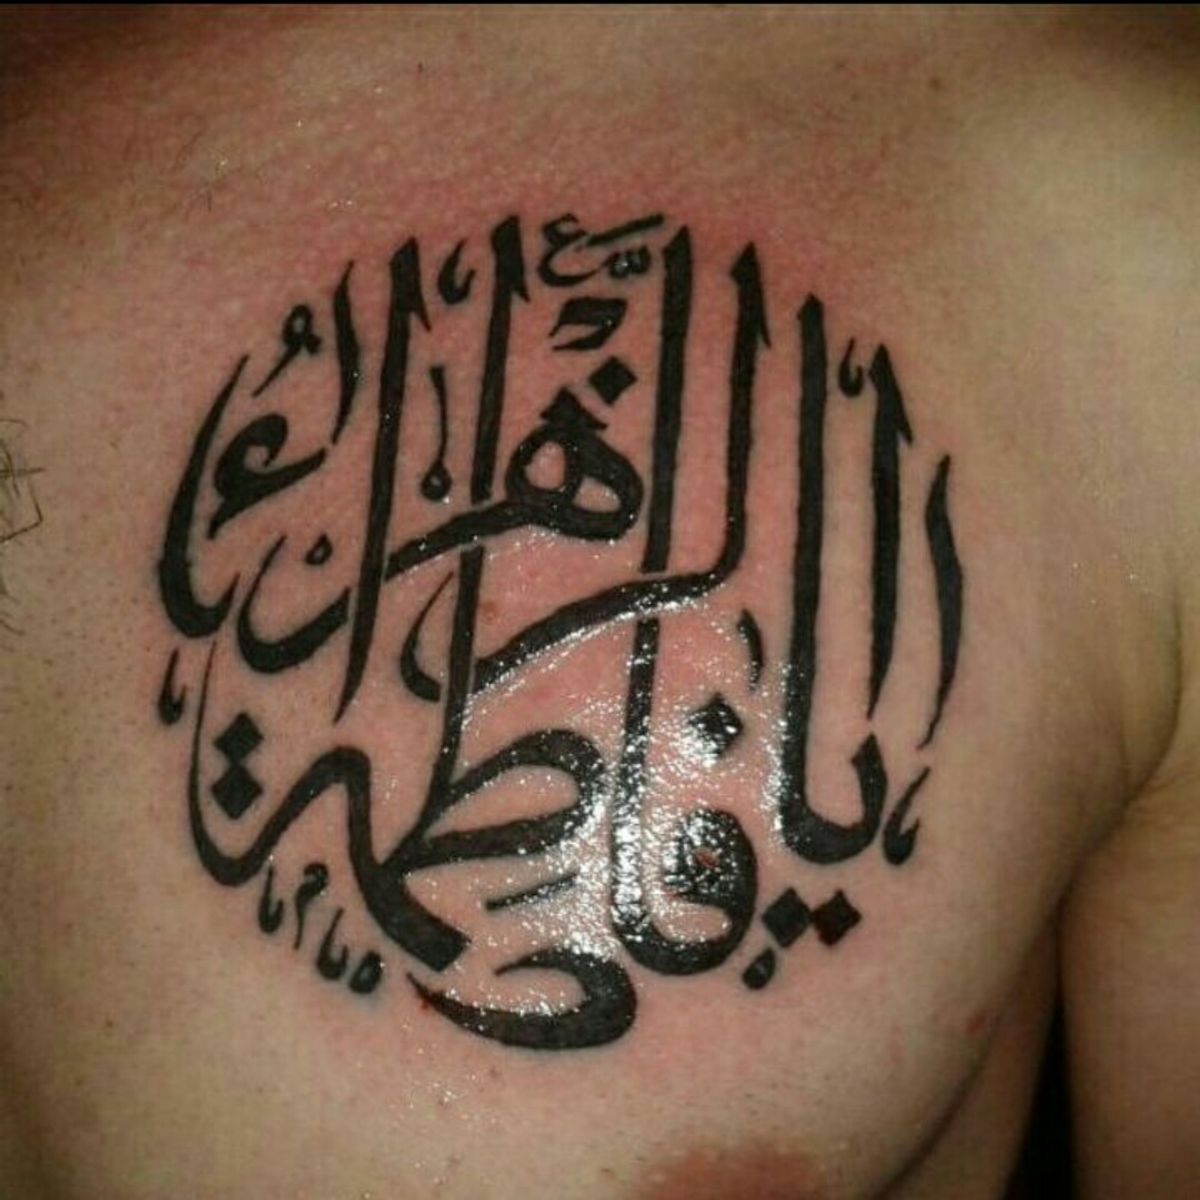 Tattoo uploaded by Abbas Chahrour • #font #black #chest #arabic #tattoo ...